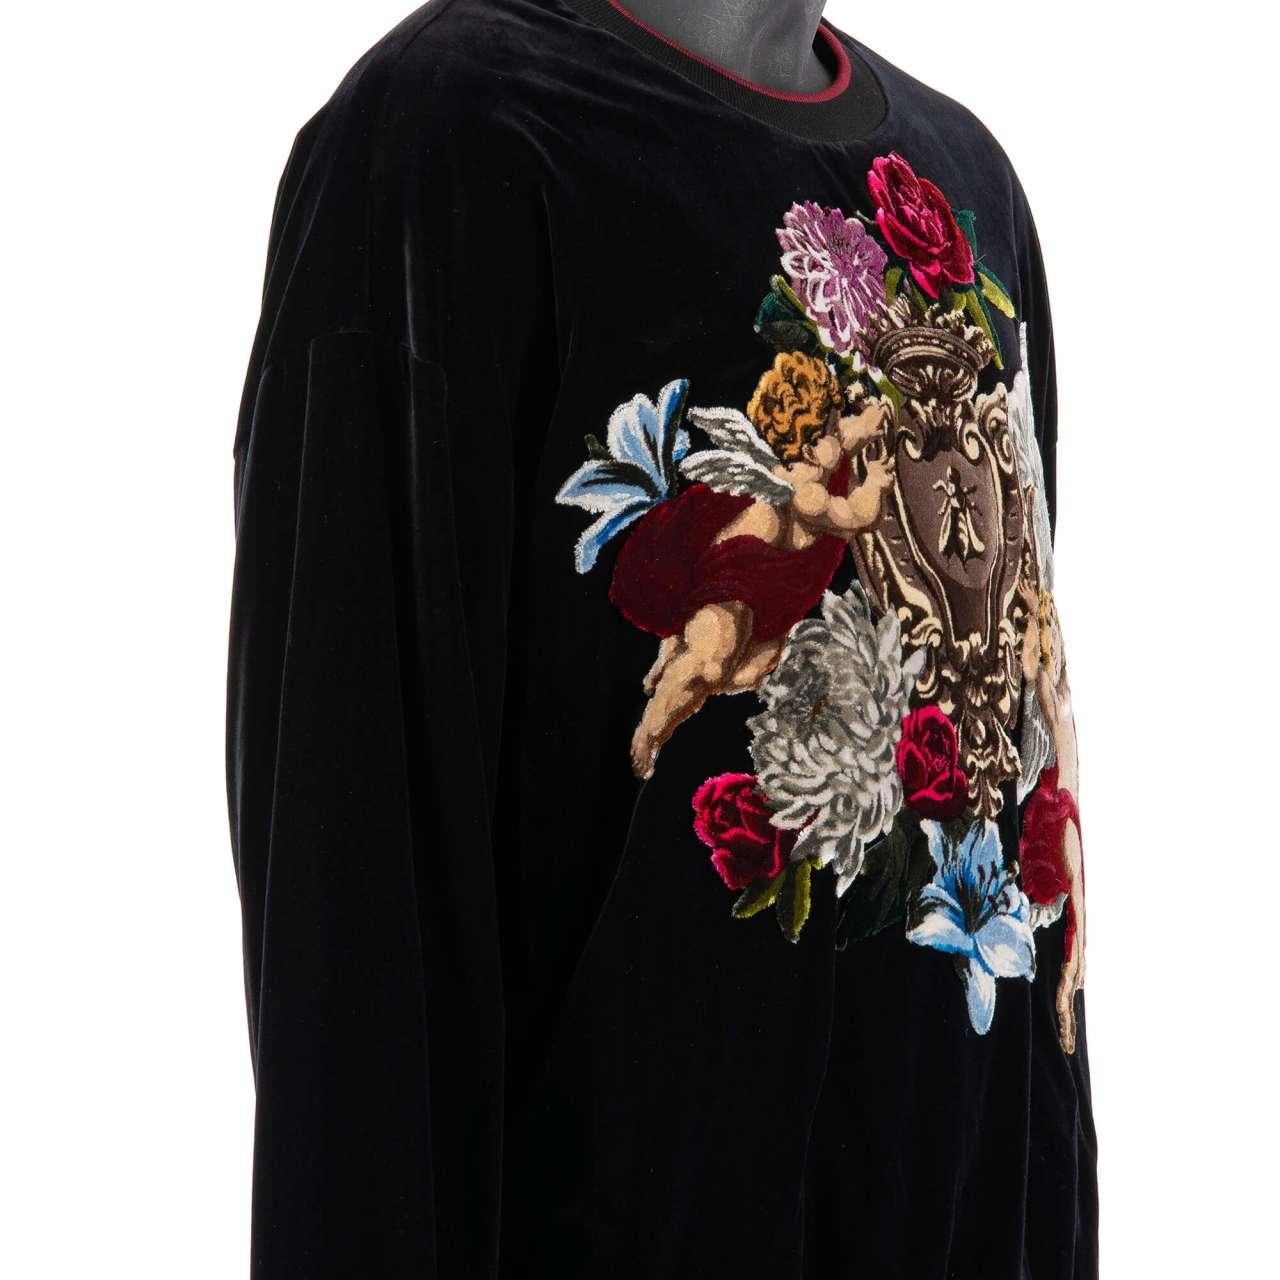 D&G Velvet Sweater with Baroque Angels and Flowers Application Black Red 54 For Sale 2